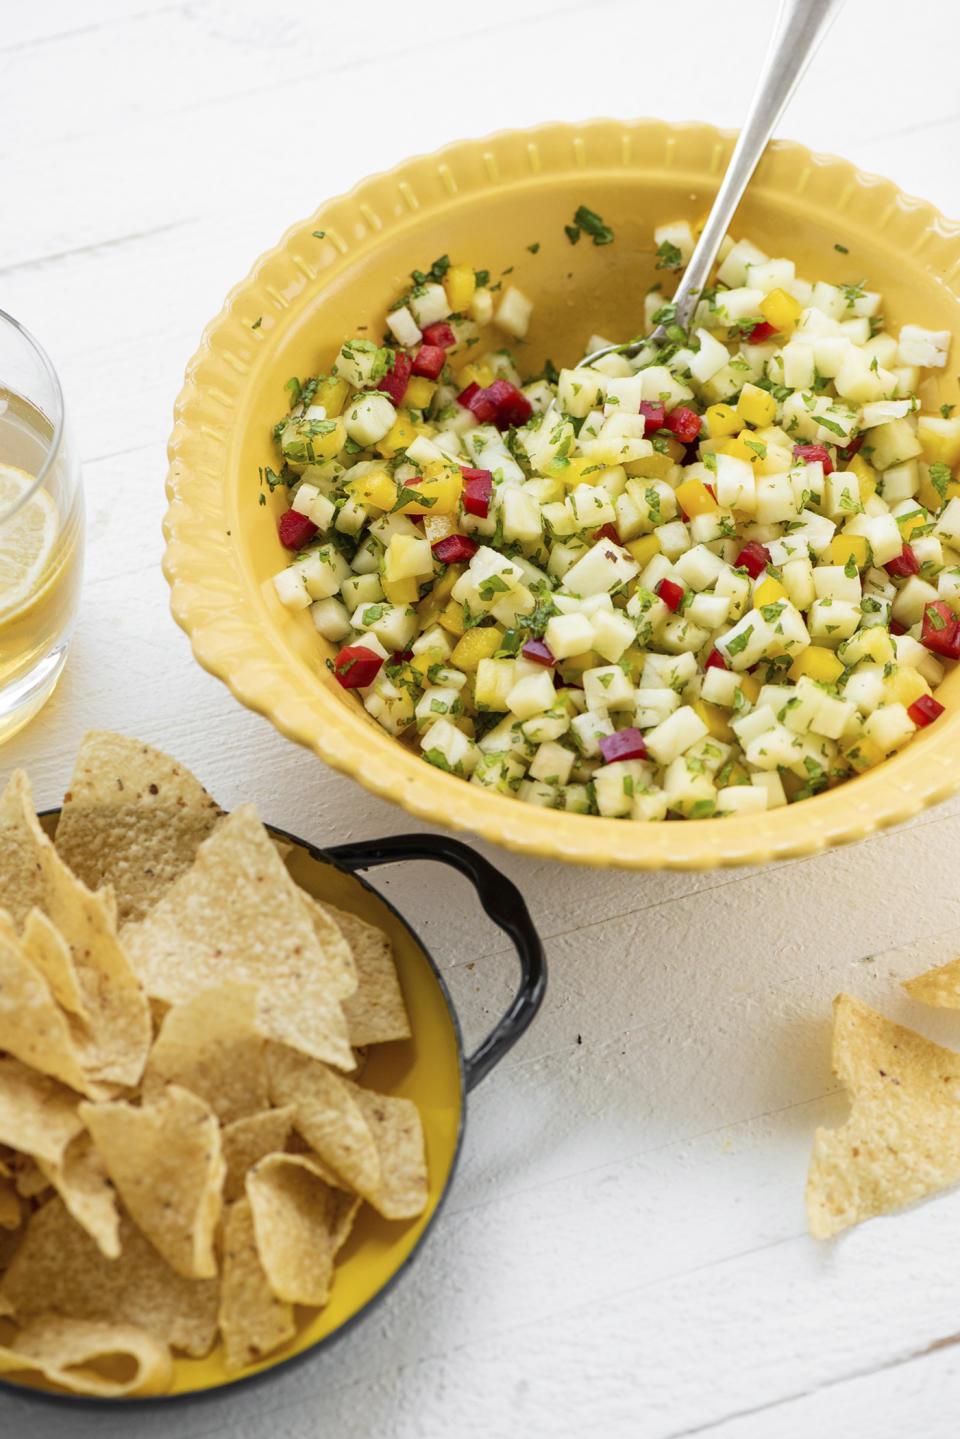 This image shows a recipe for pineapple mint jalapeno salsa. While everyone loves a classic tomato-based salsa, you can shake things up with different fruit-based salsas. (Cheyenne Cohen via AP)